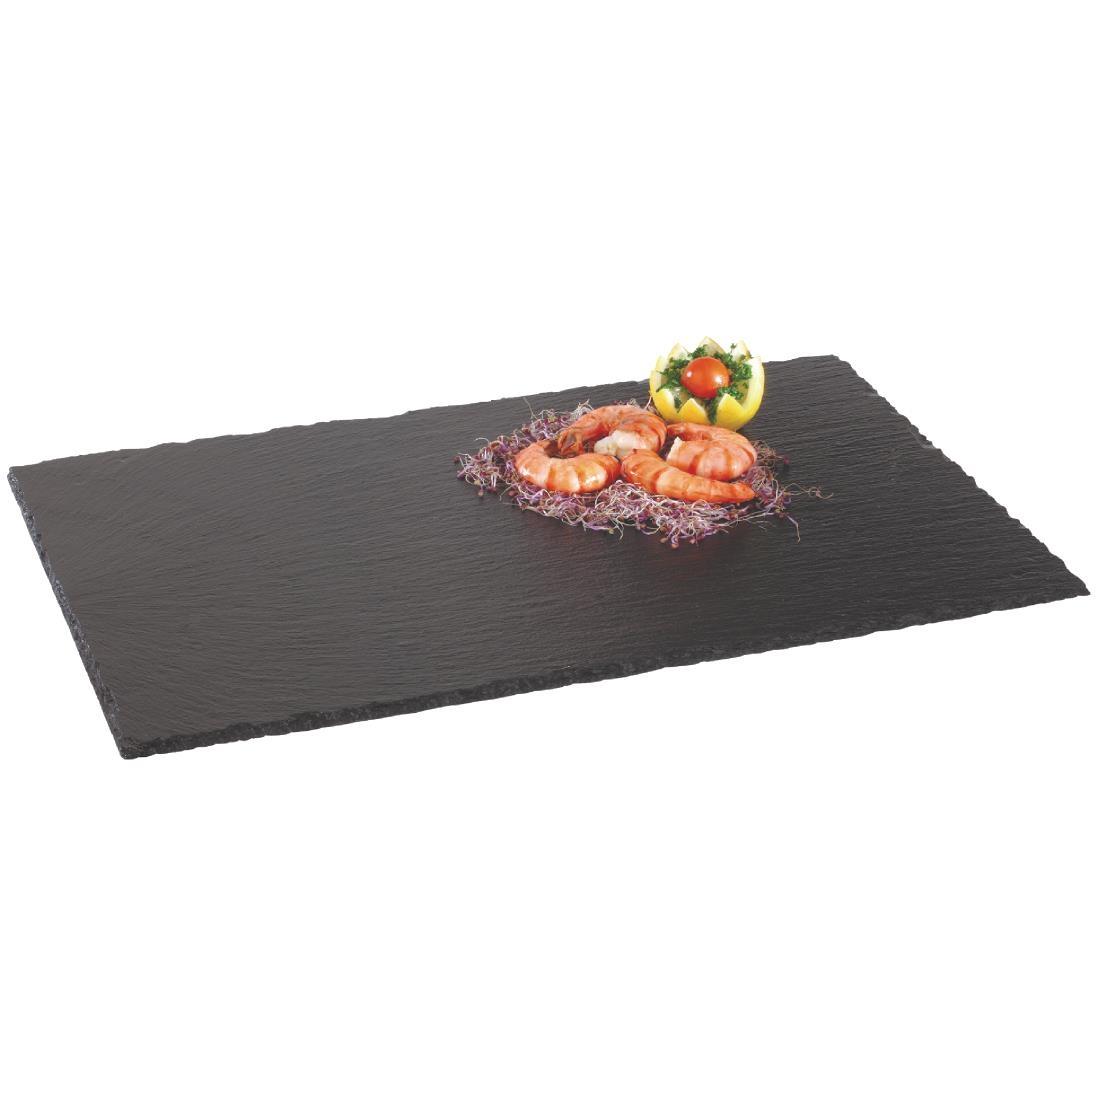 Olympia Natural Slate Tray GN 1/1 - DP160  - 1